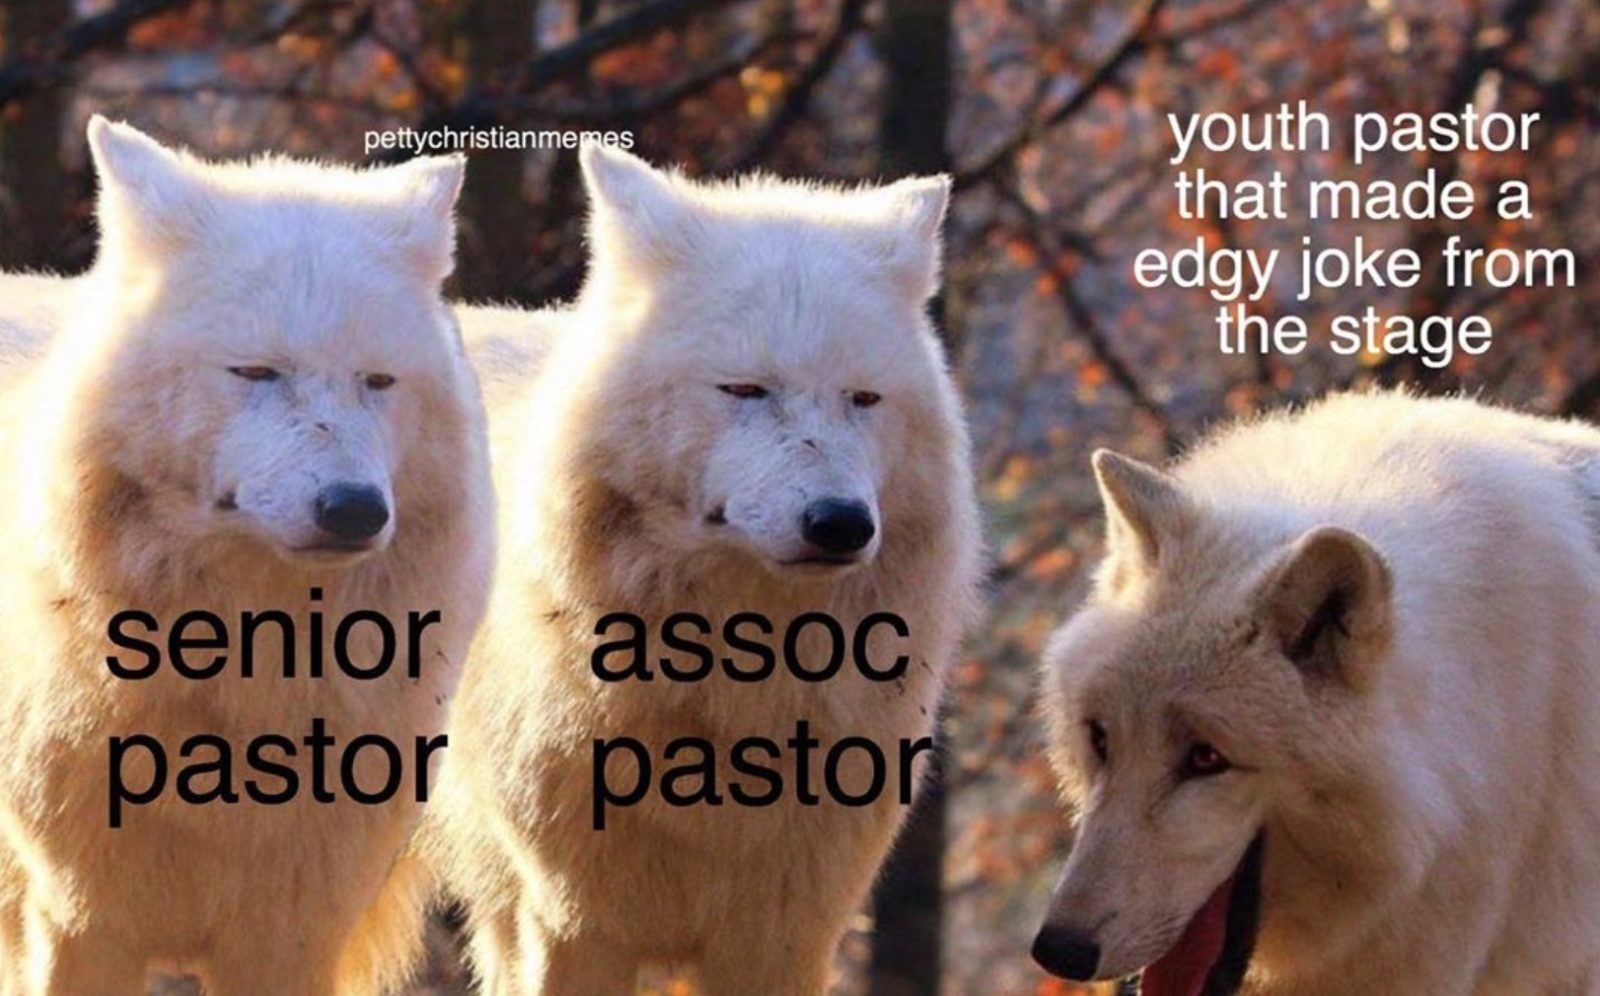 5 Christian Meme Accounts That Are Actually Pretty Funny - RELEVANT